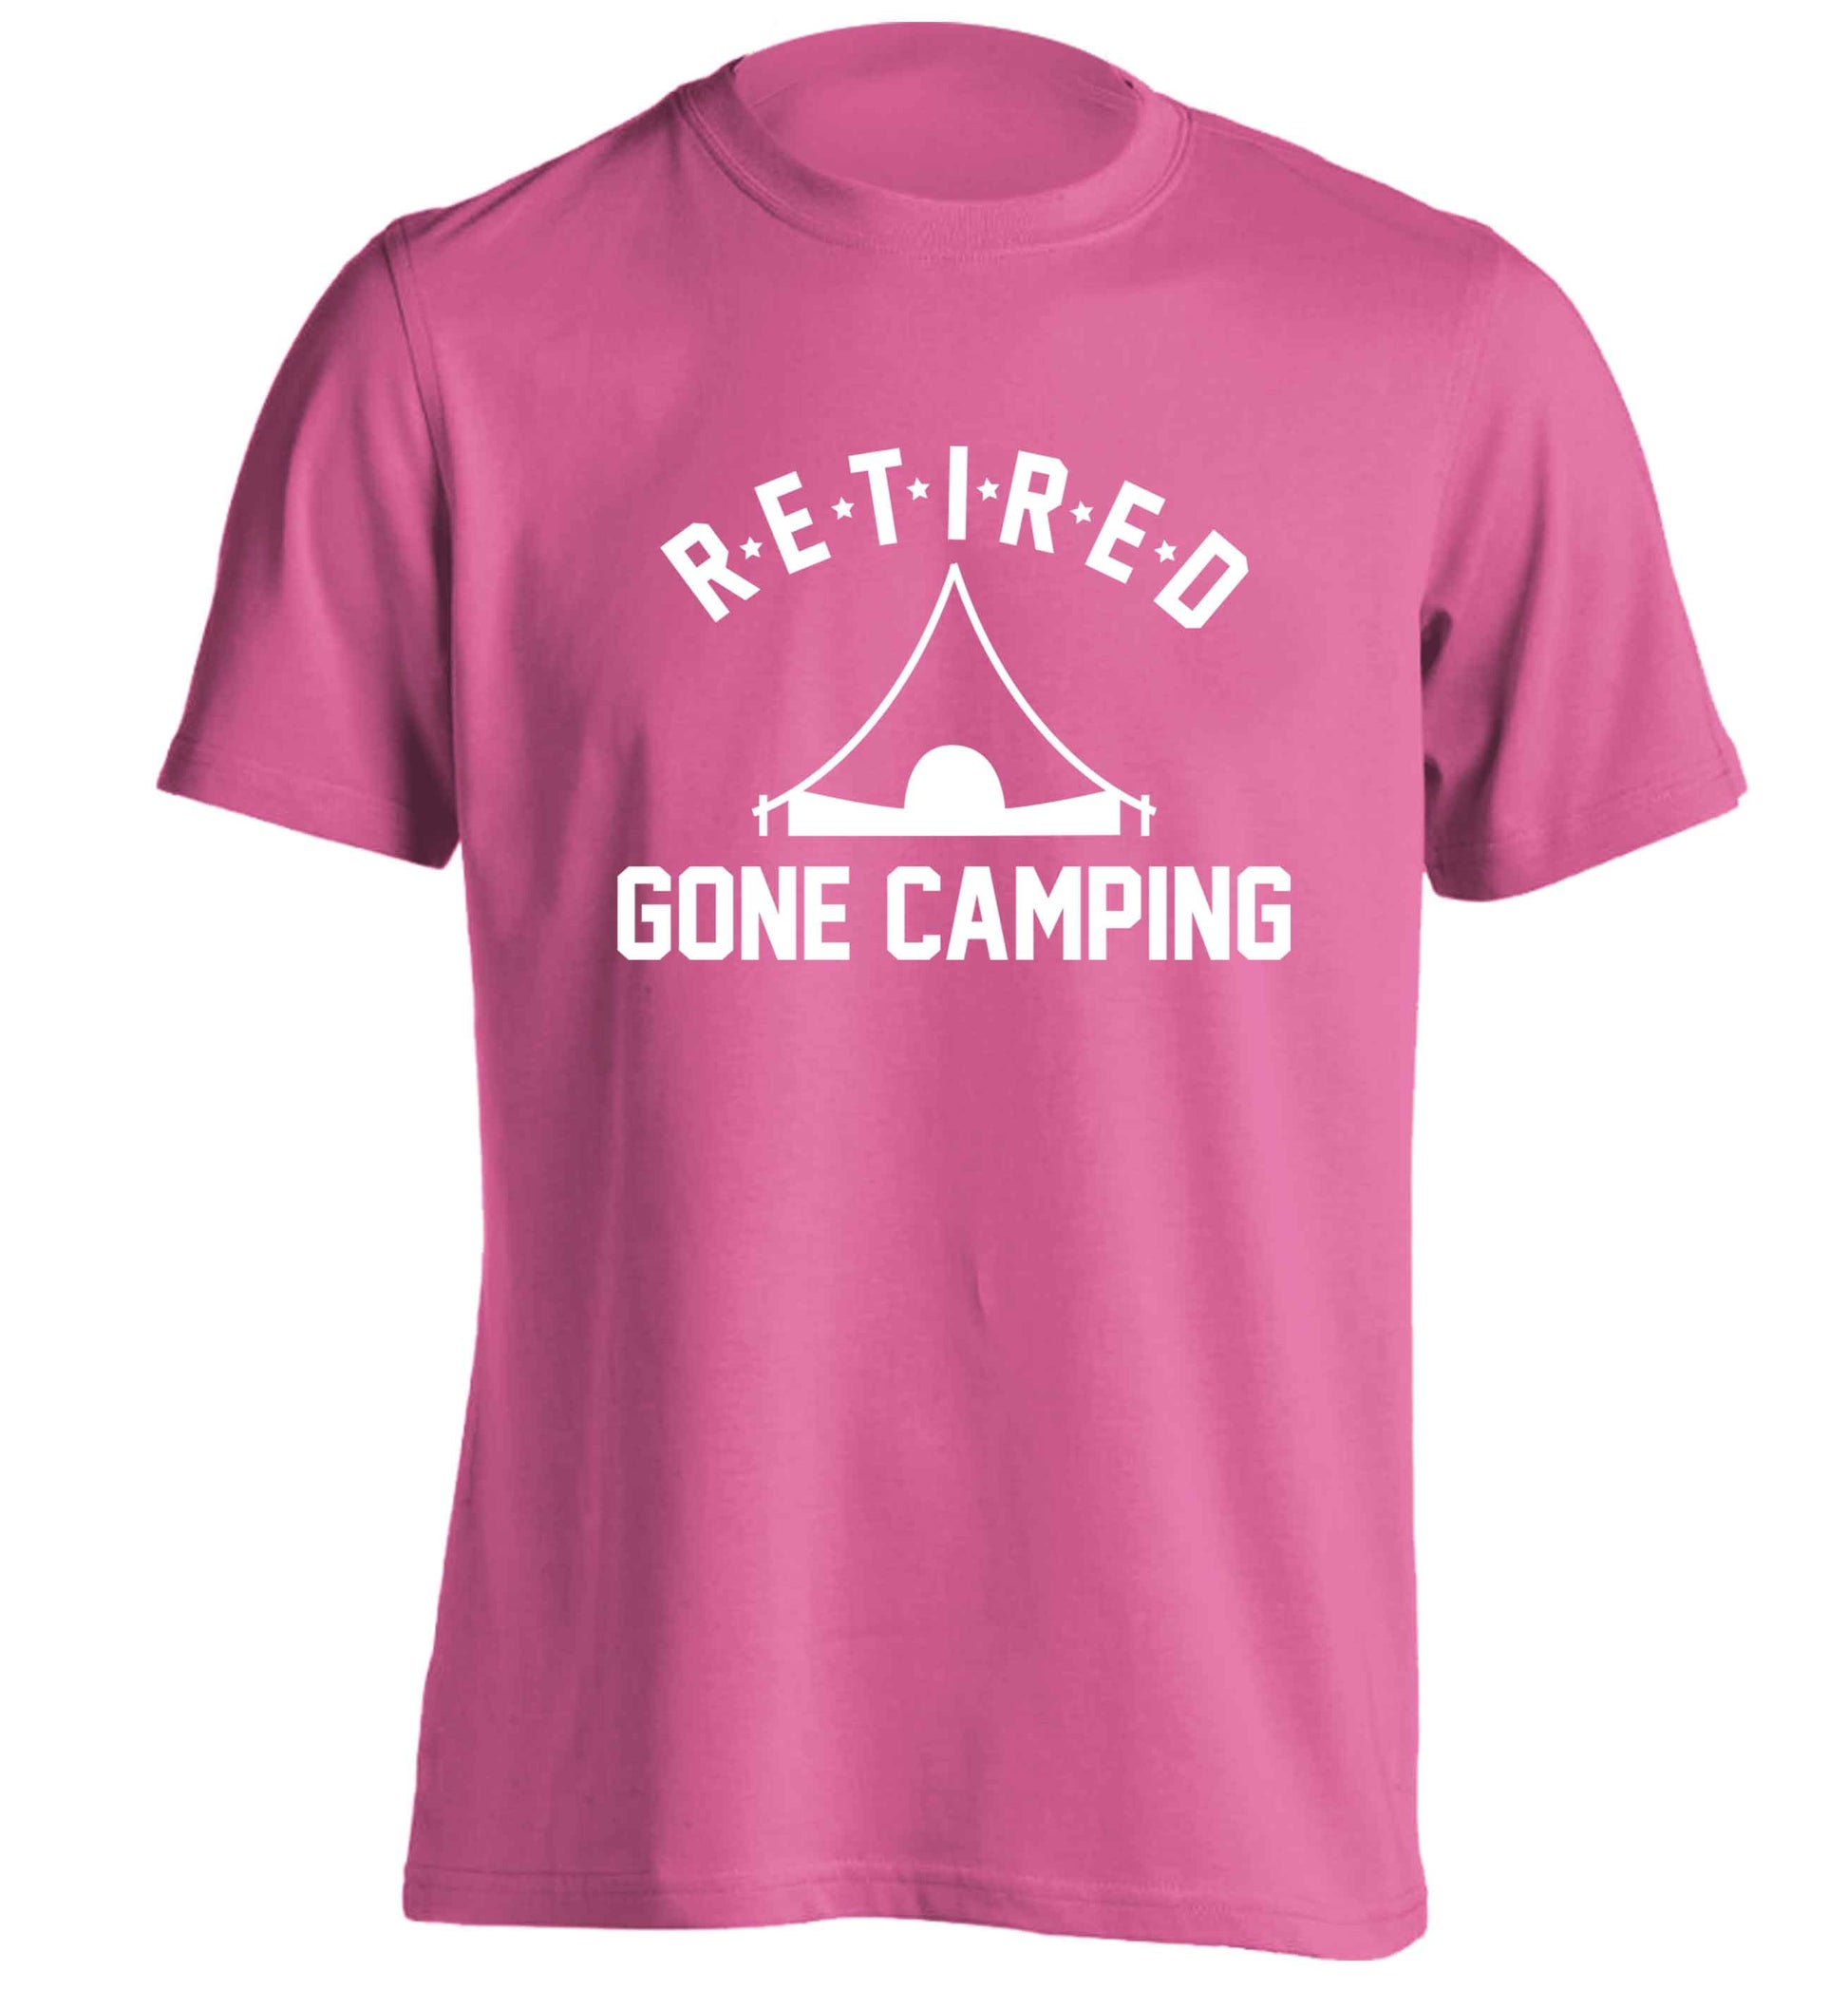 Retired gone camping adults unisex pink Tshirt 2XL